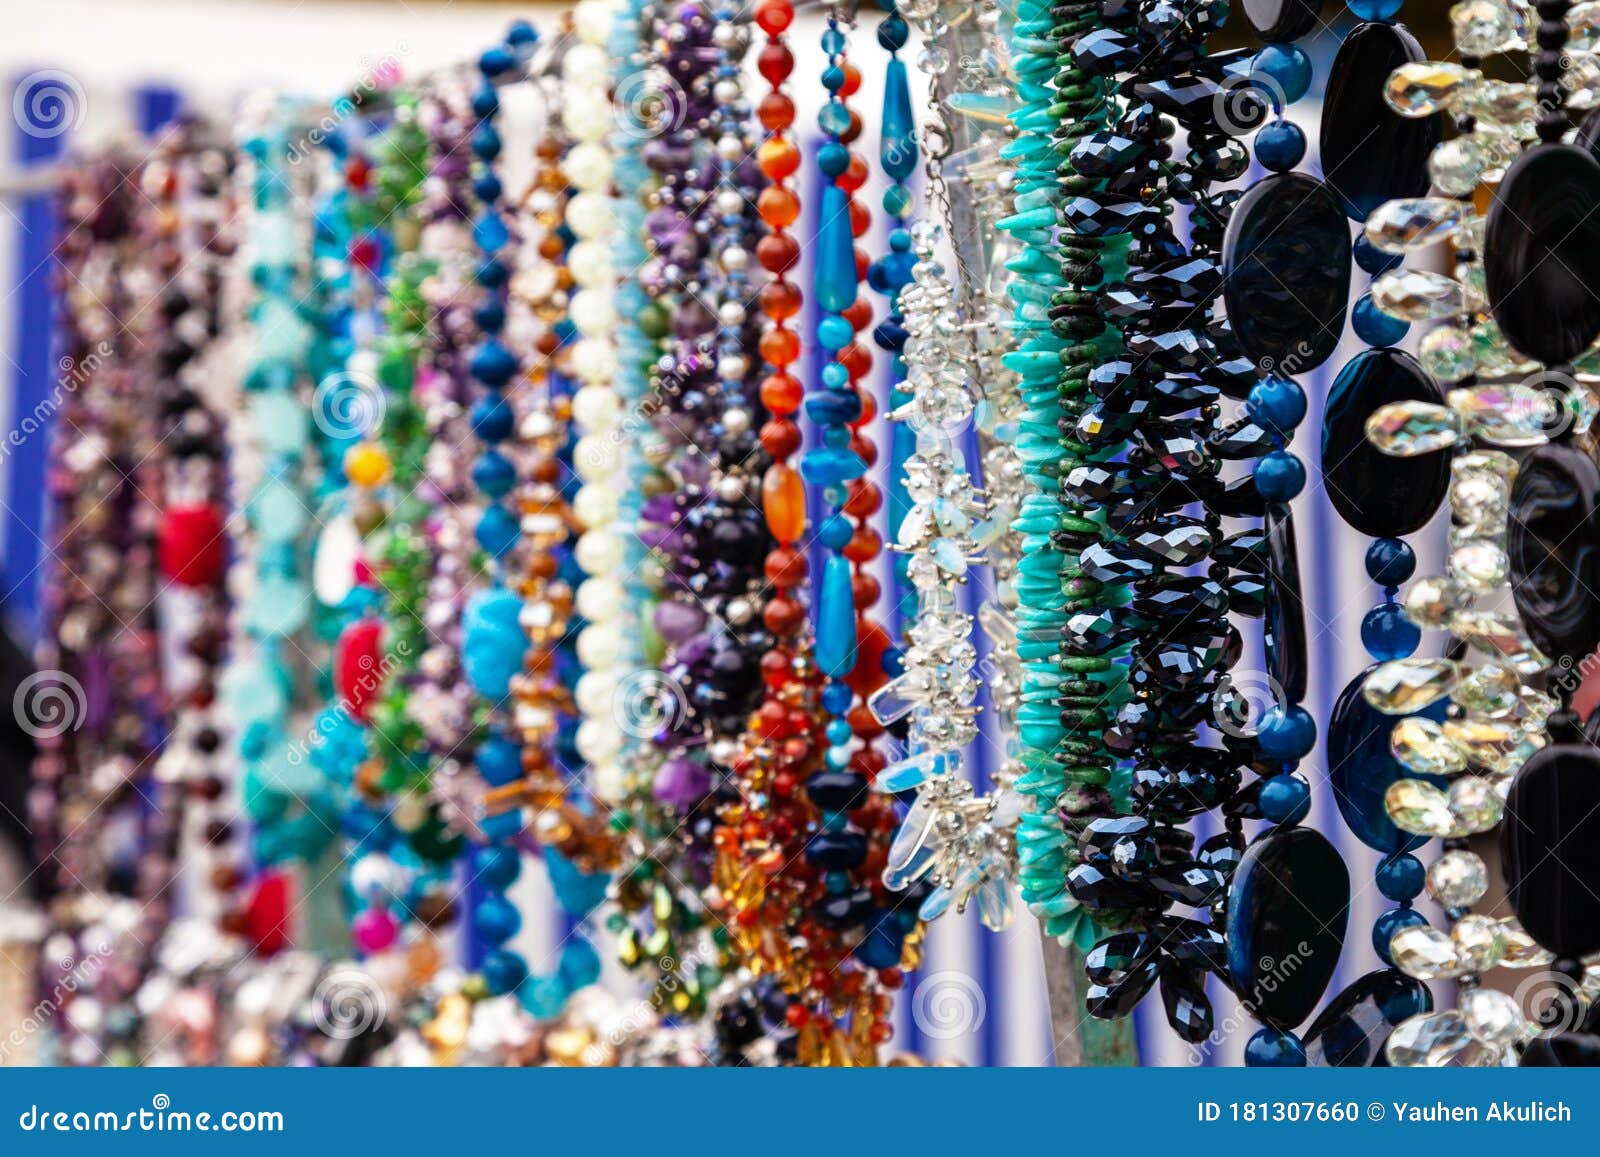 Various Colorful Beads in the Market. Wallpaper Background of a ...